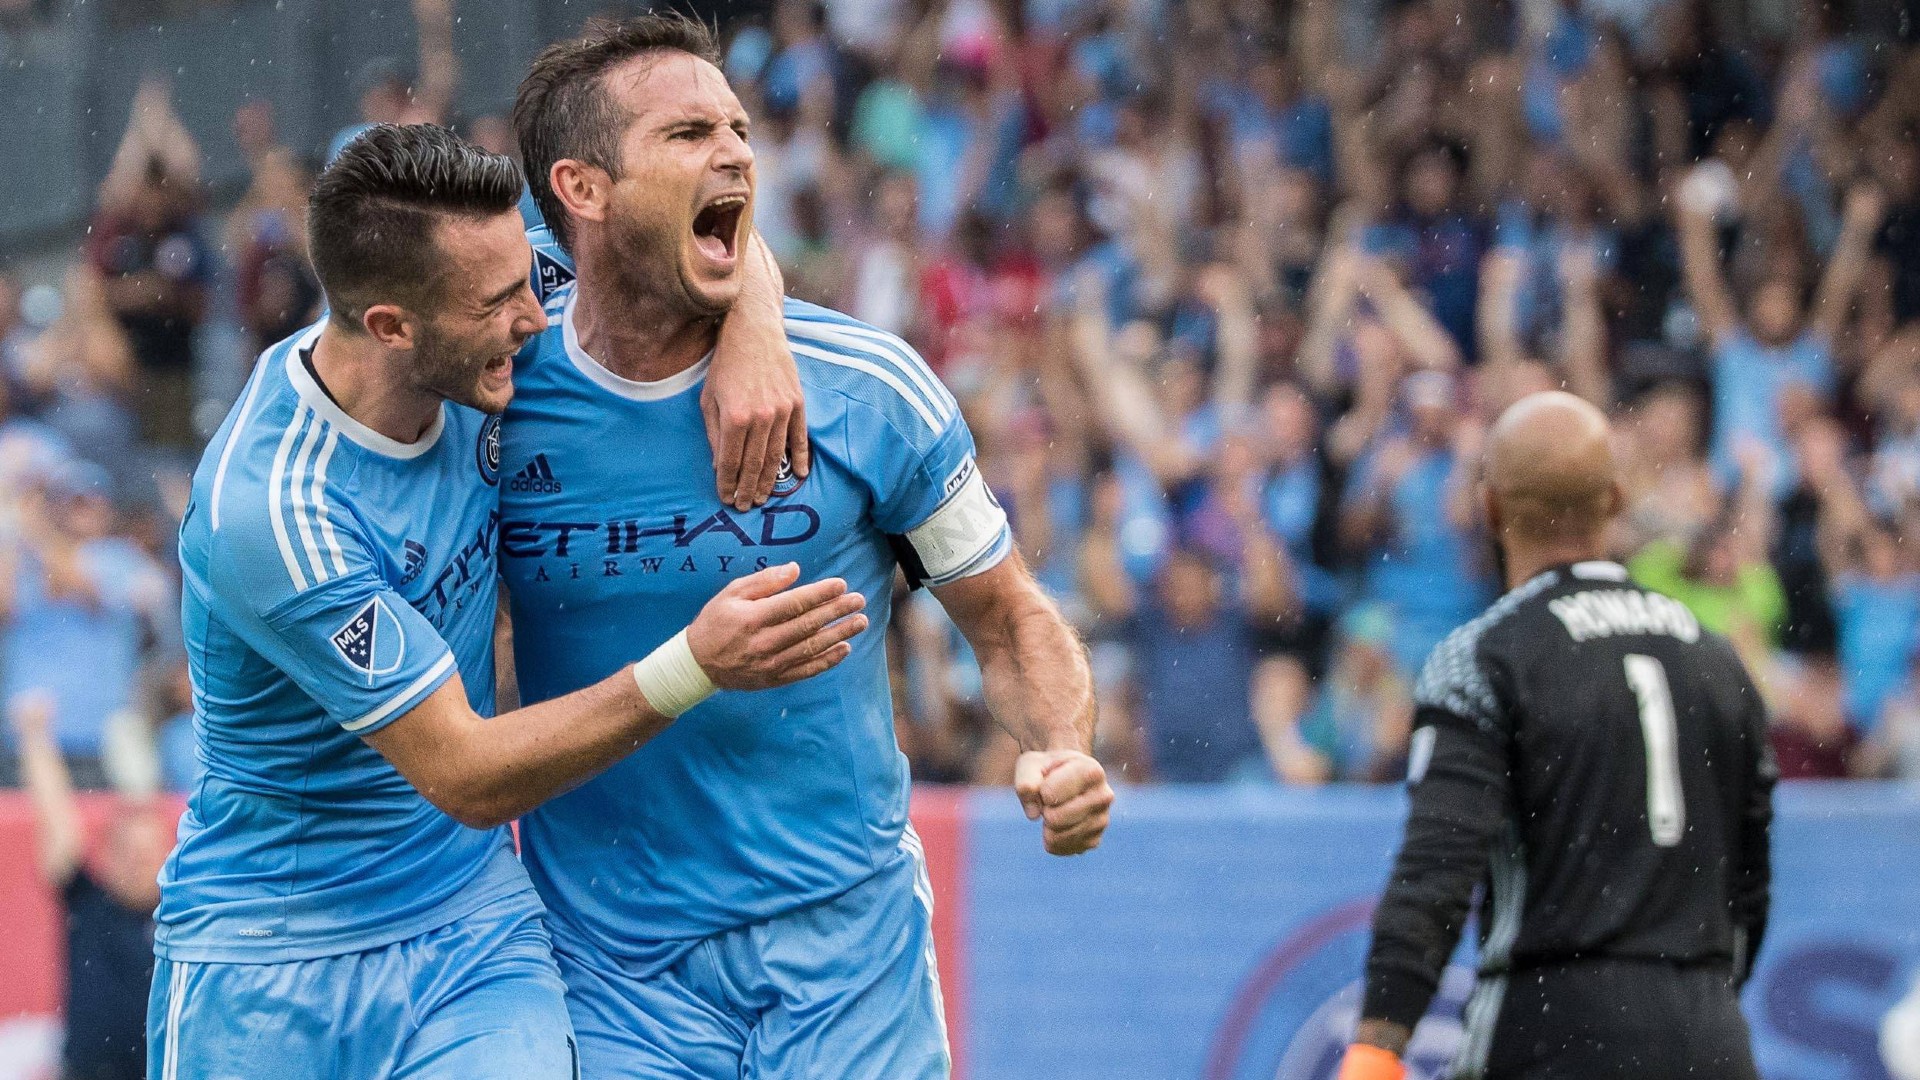 NEW YORK STATE OF MIND: Frank Lampard celebrates a goal for New York City FC.